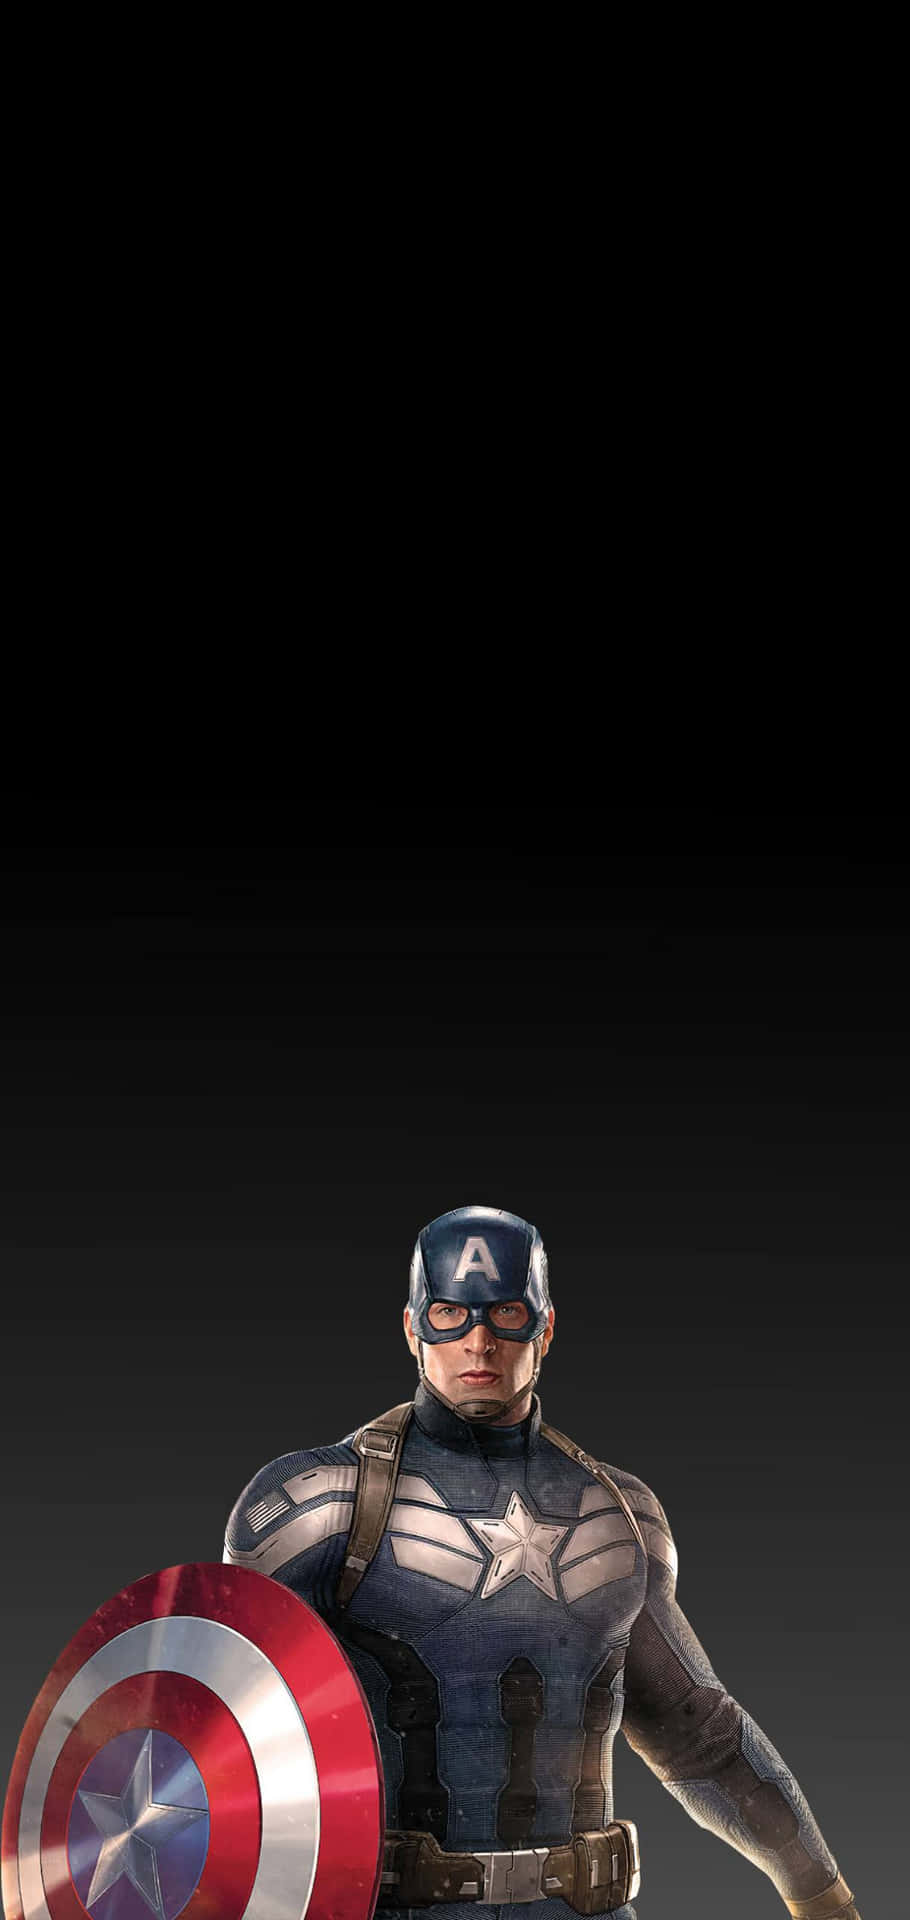 Gear Up For Cool Adventures With Captain America Wallpaper